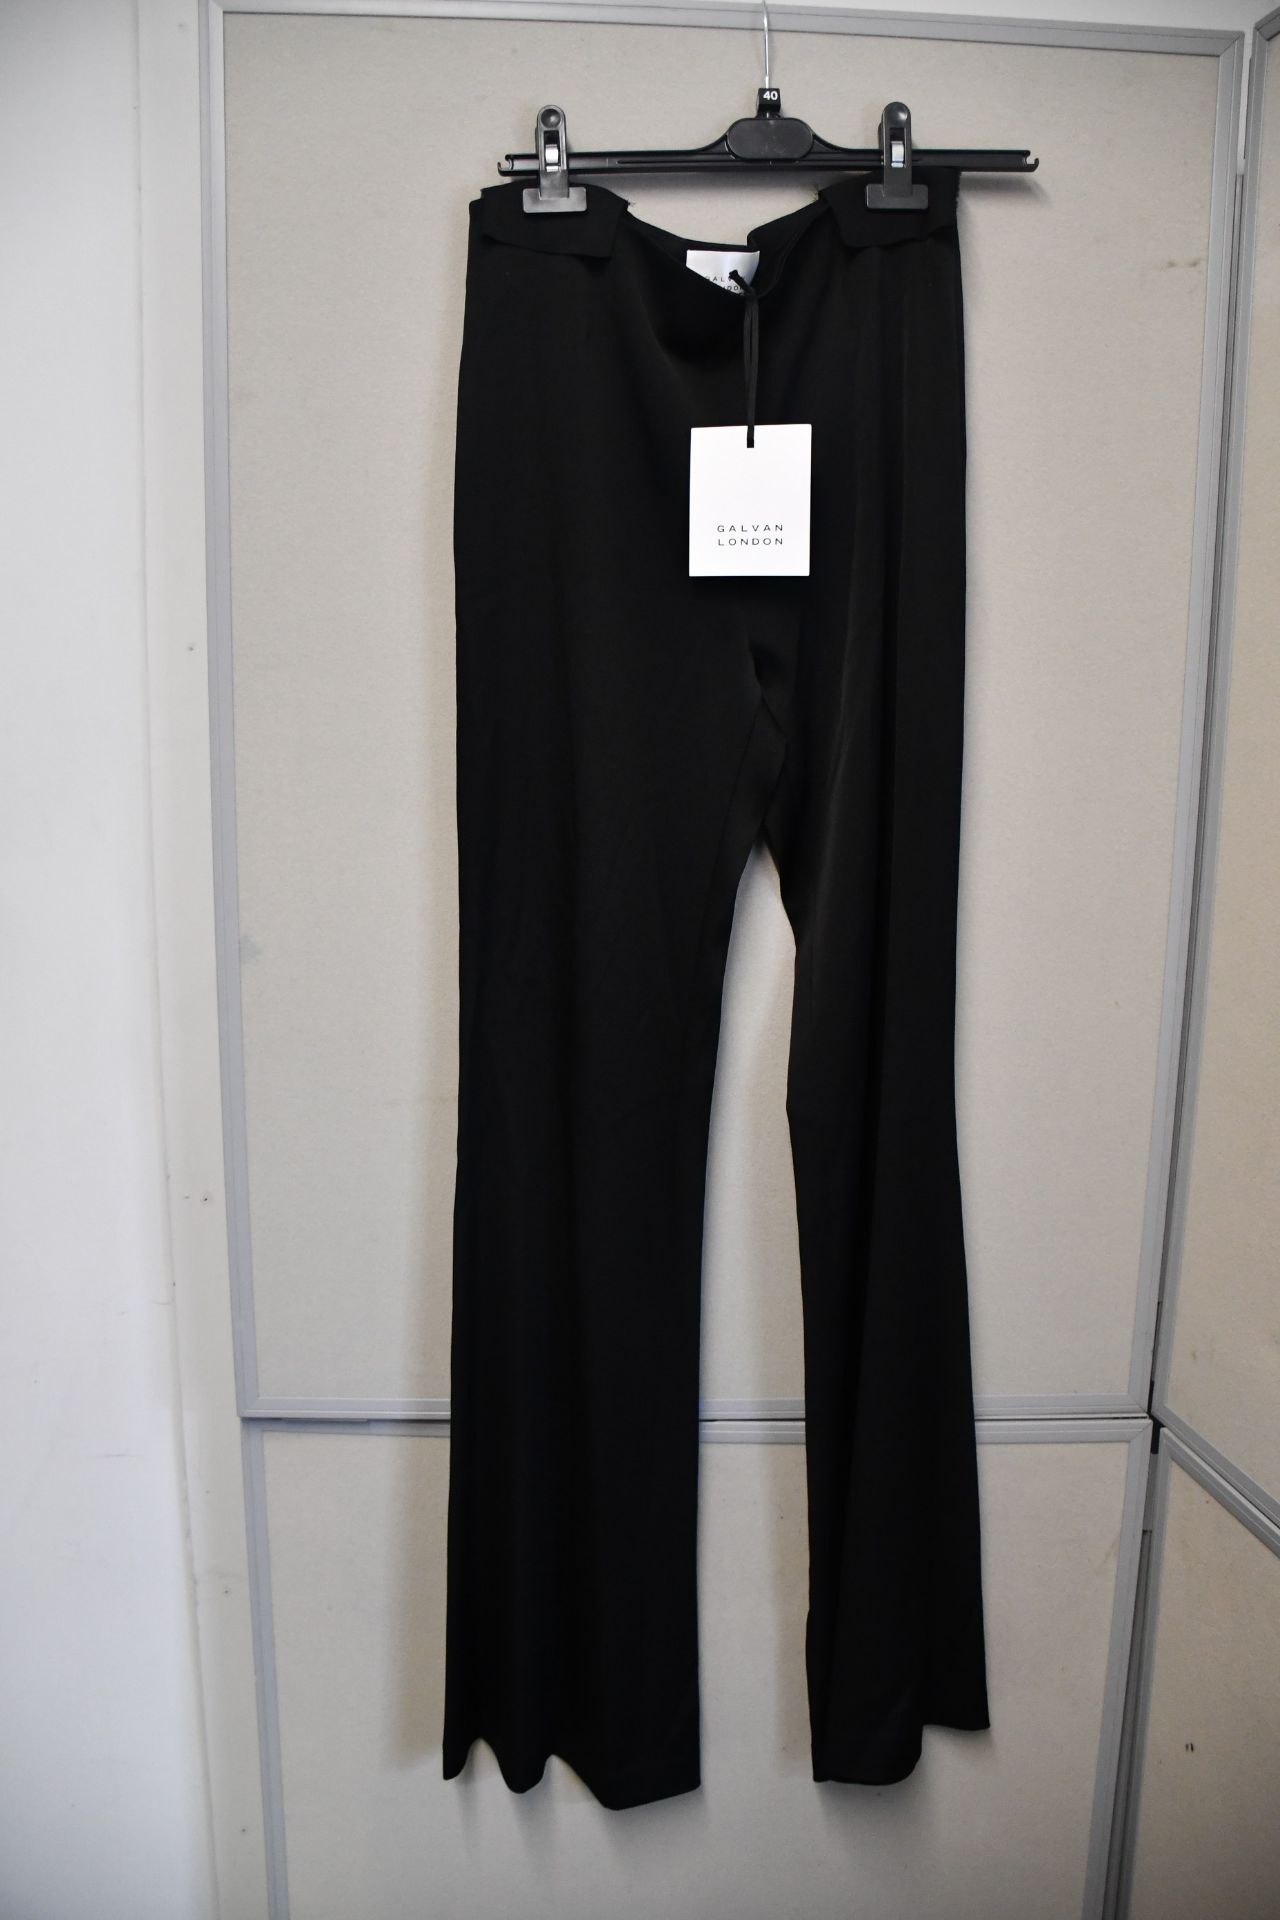 One as new Galvan London Satin Crepe high waisted satin black trousers size 36 (100COTR300201BK).